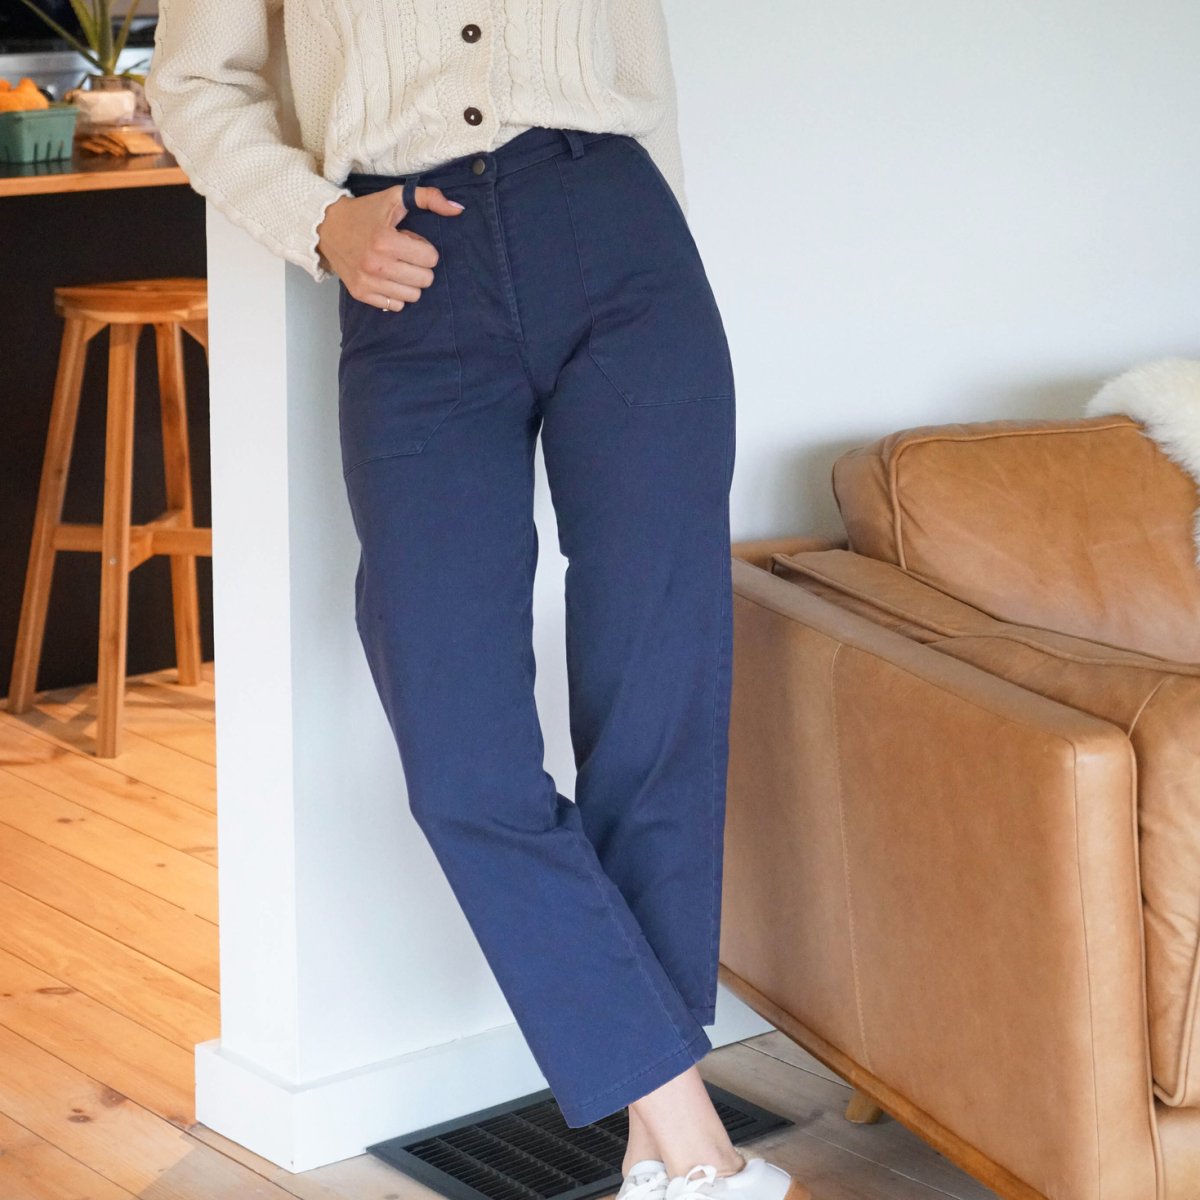 Navy blue straight leg work pants designed by Loup and made in New York City, USA.